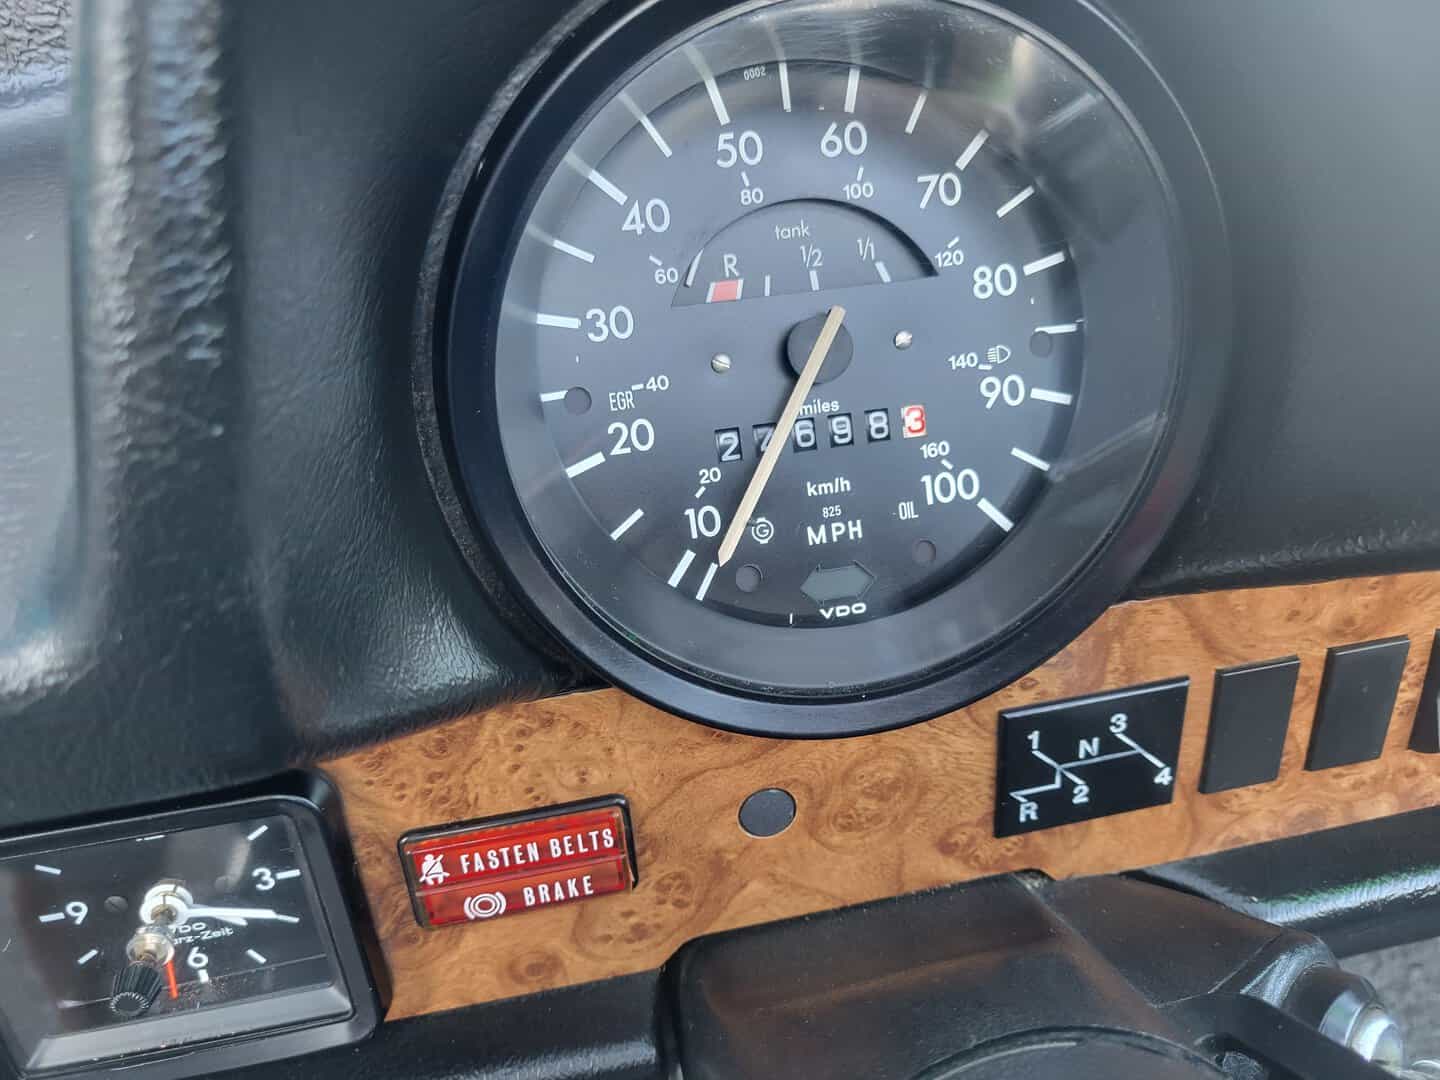 A 1979 Volkswagen Beetle Convertible dashboard showcasing a clock and gauges.